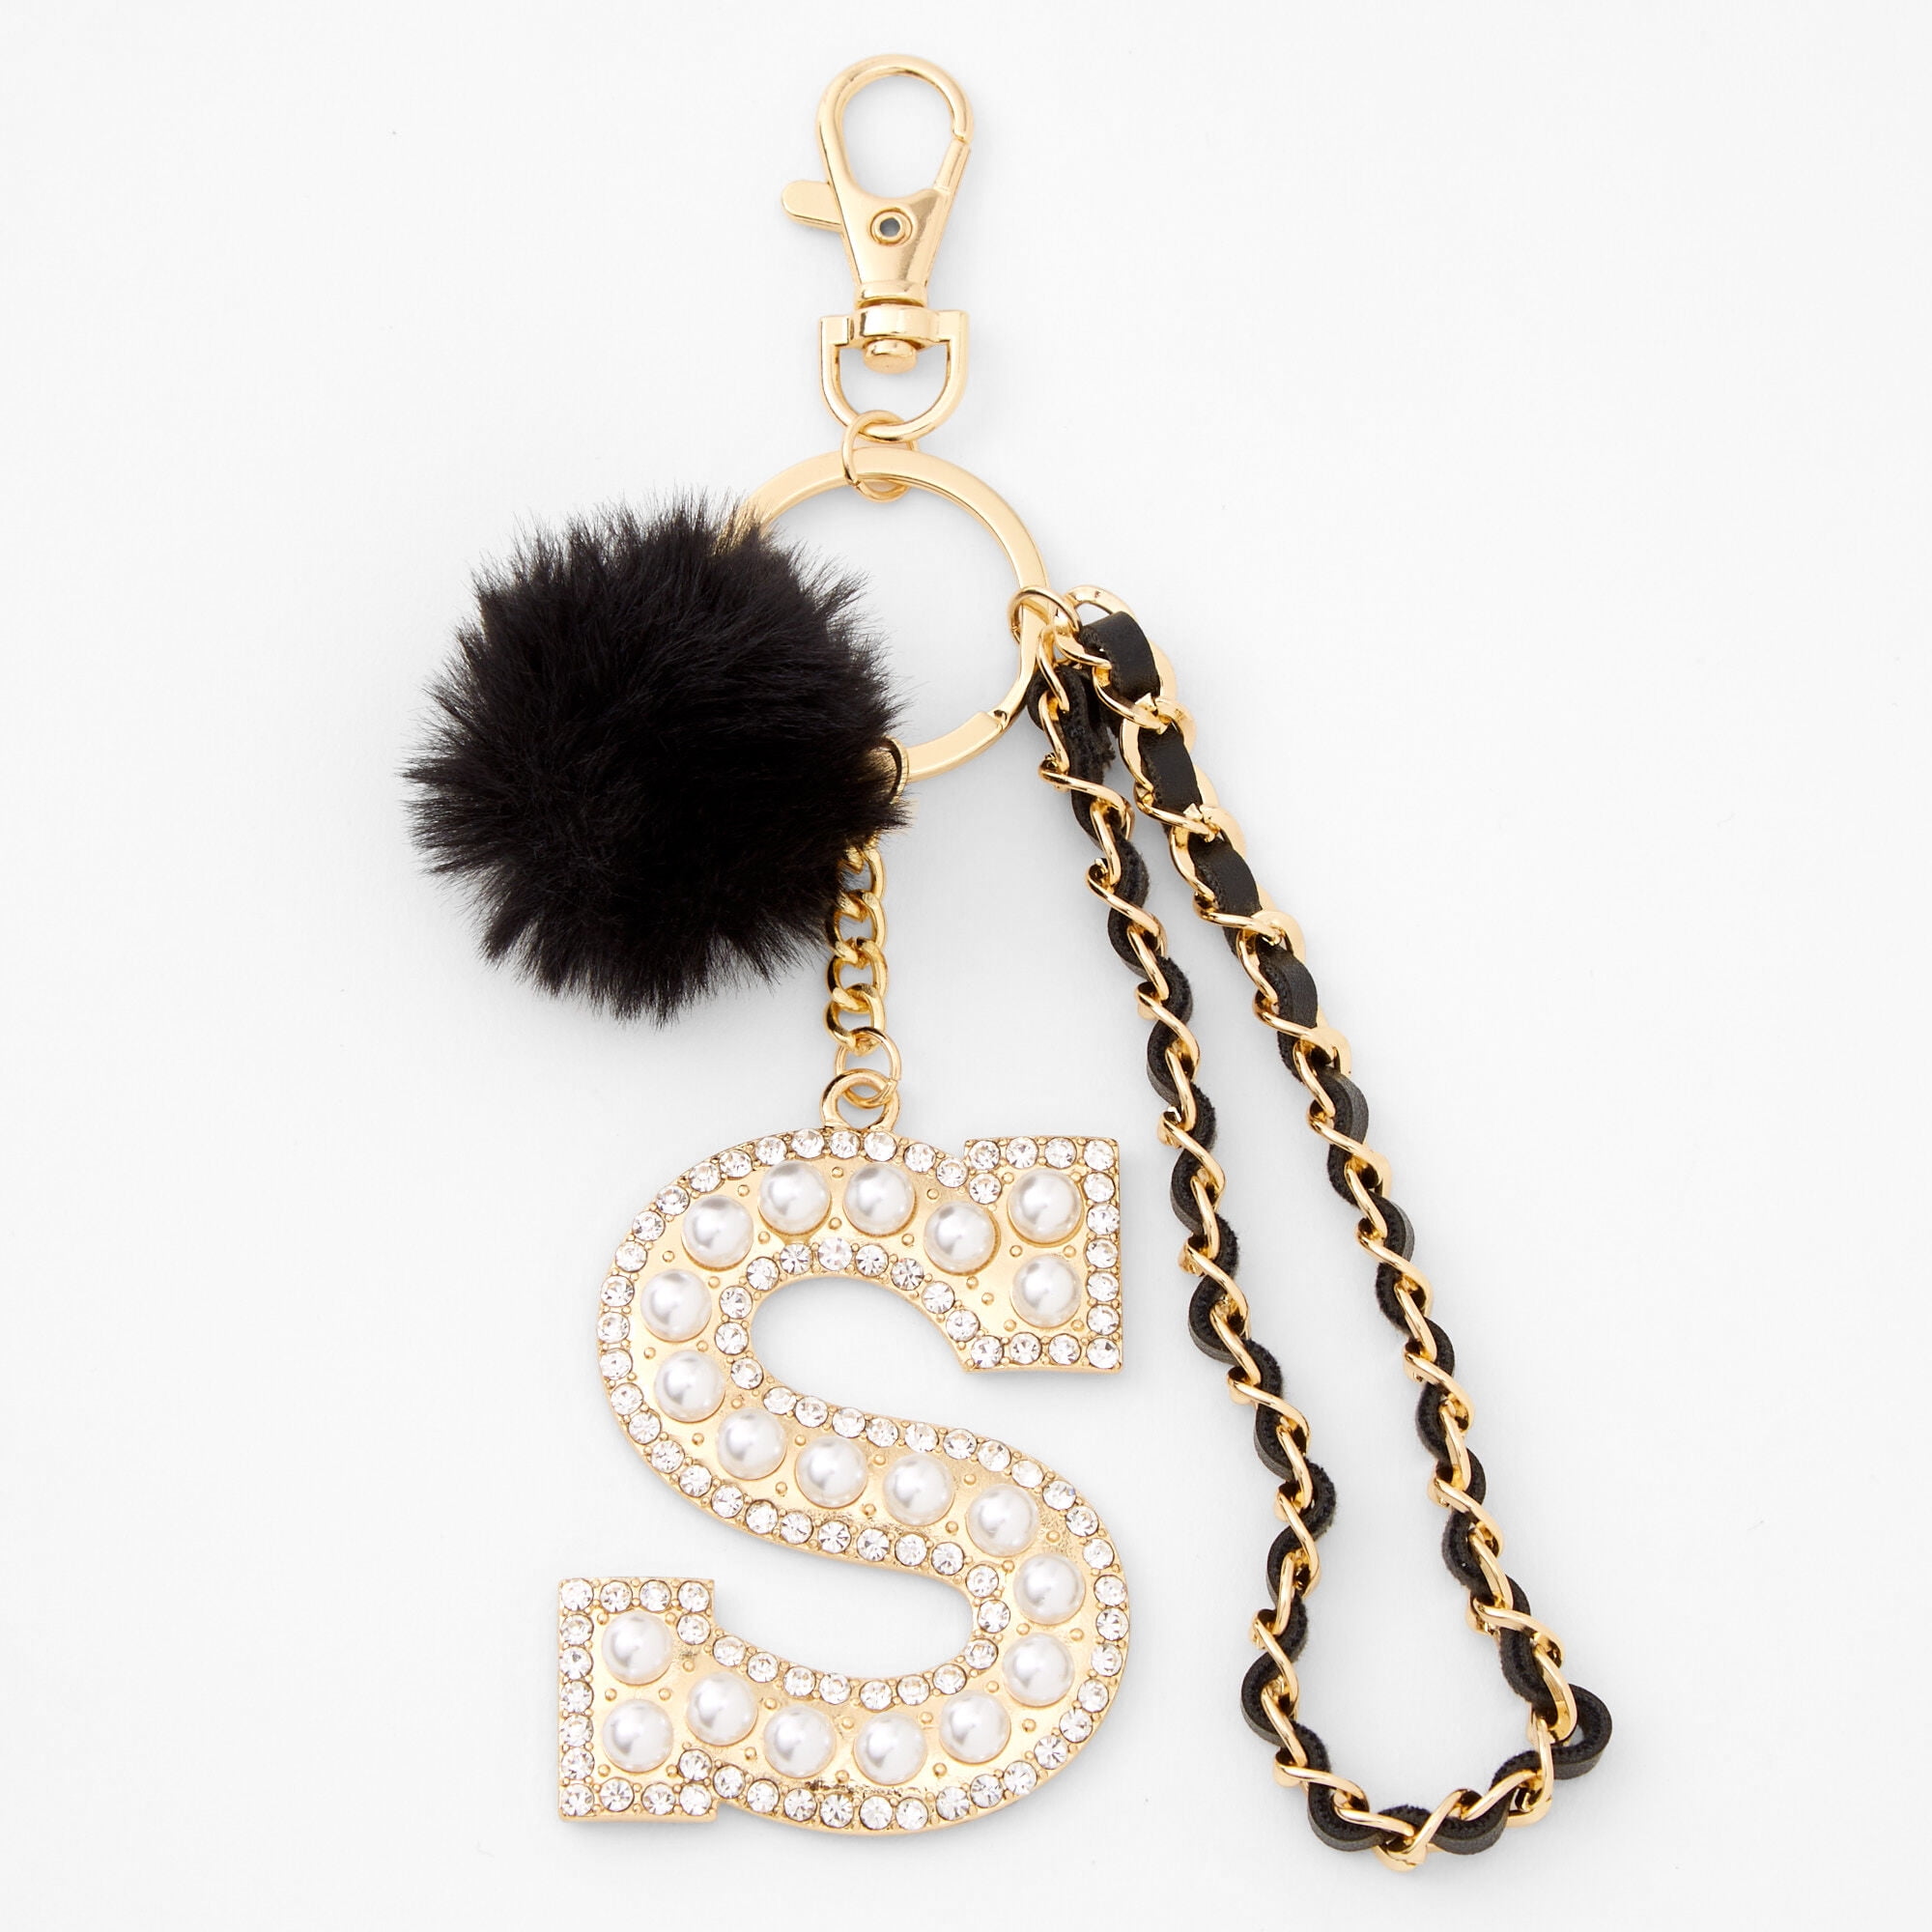 Little Luxuries Designs Glitter Filled Black and Gold Acrylic Letter/Initial with Pom Pom Keychain/Bag Charm